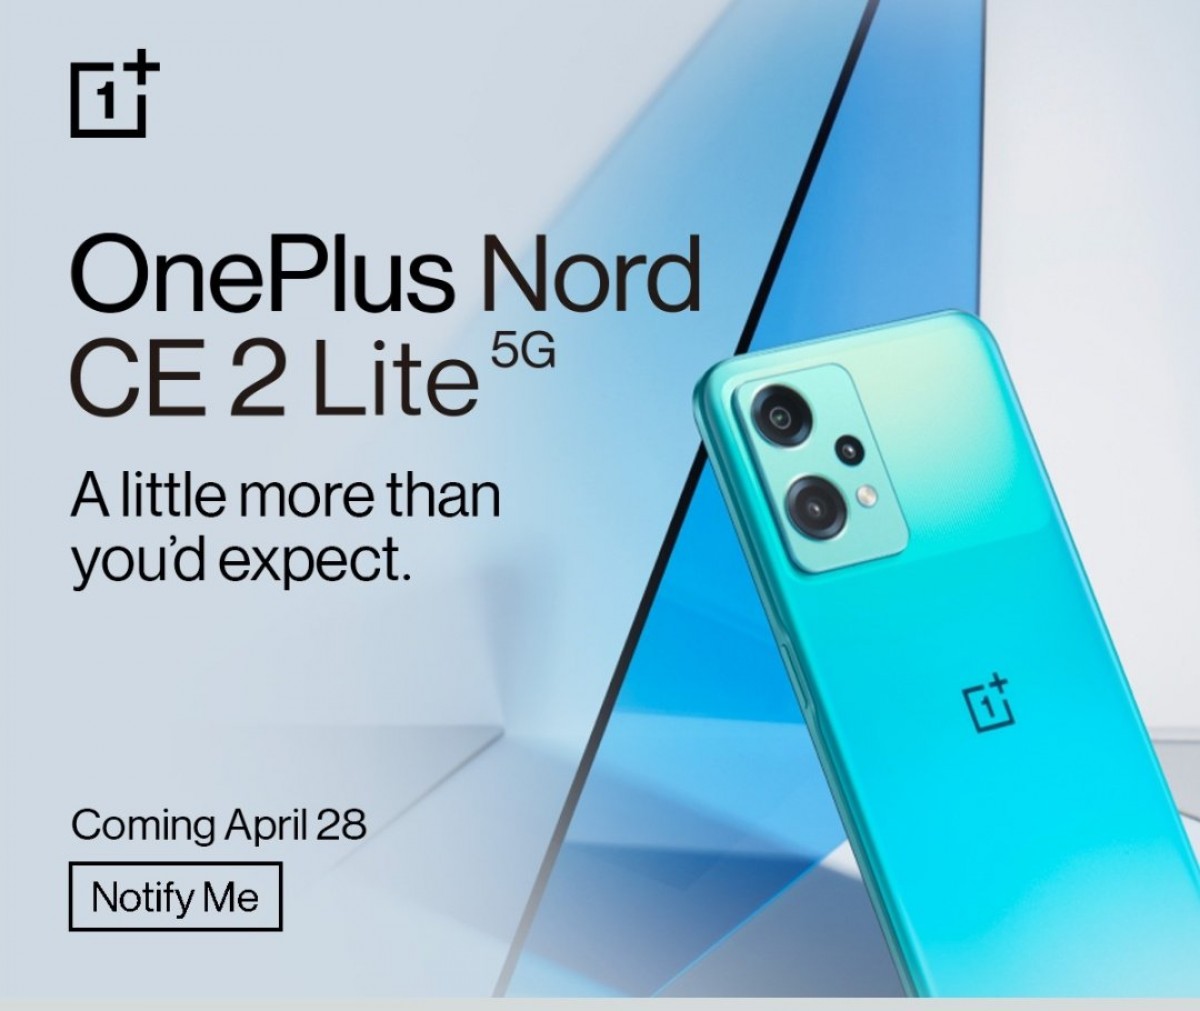 OnePlus Nord CE 2 Lite 5G is coming to India on April 28